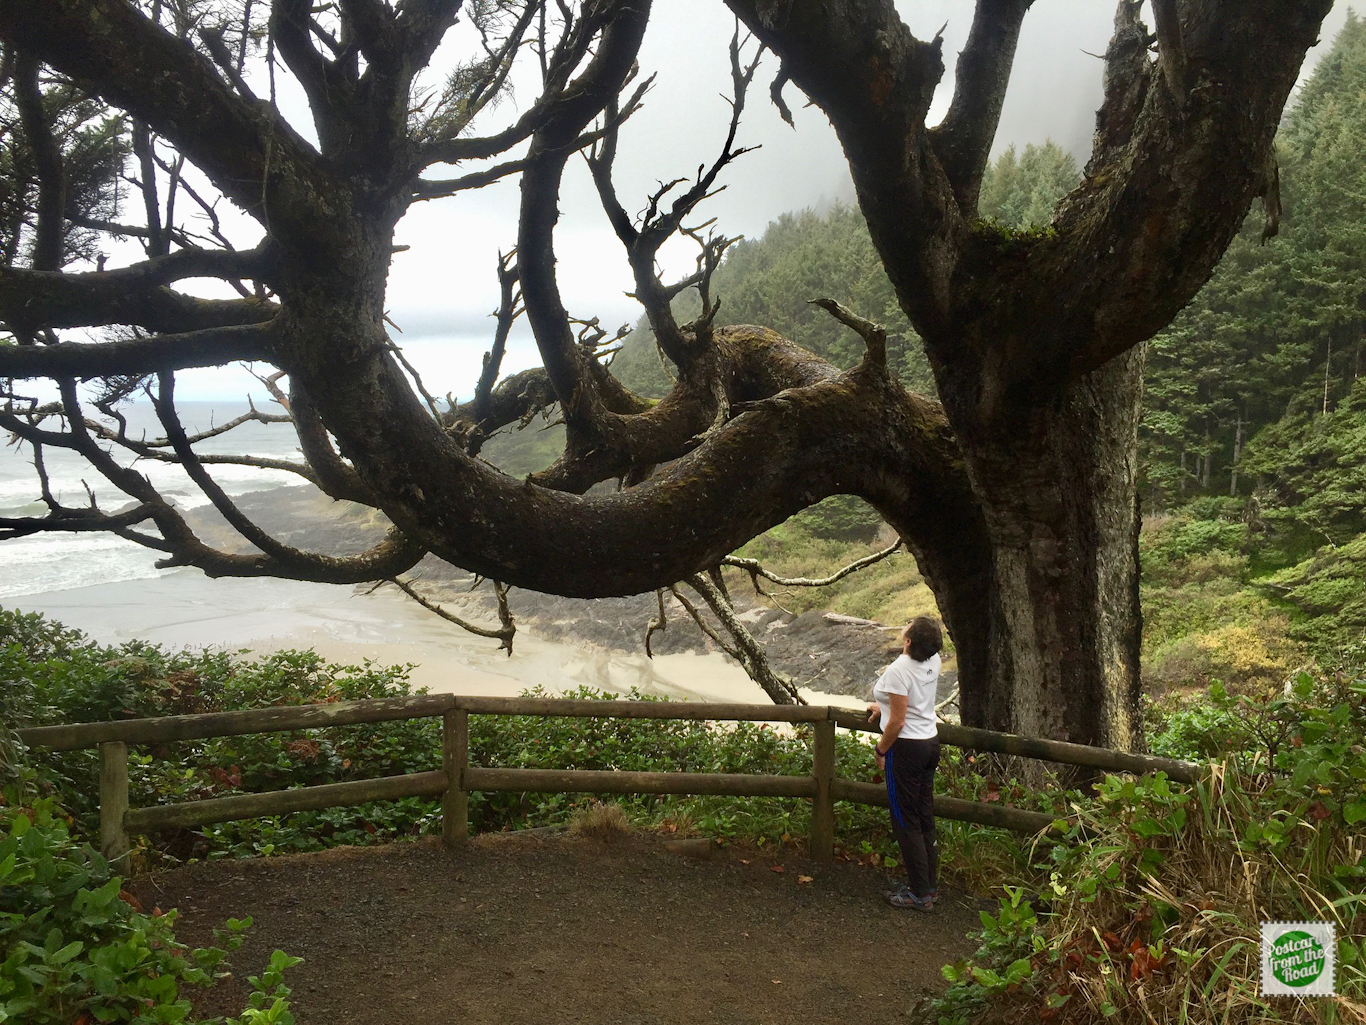 Huge tree hanging over the trail to the beach.